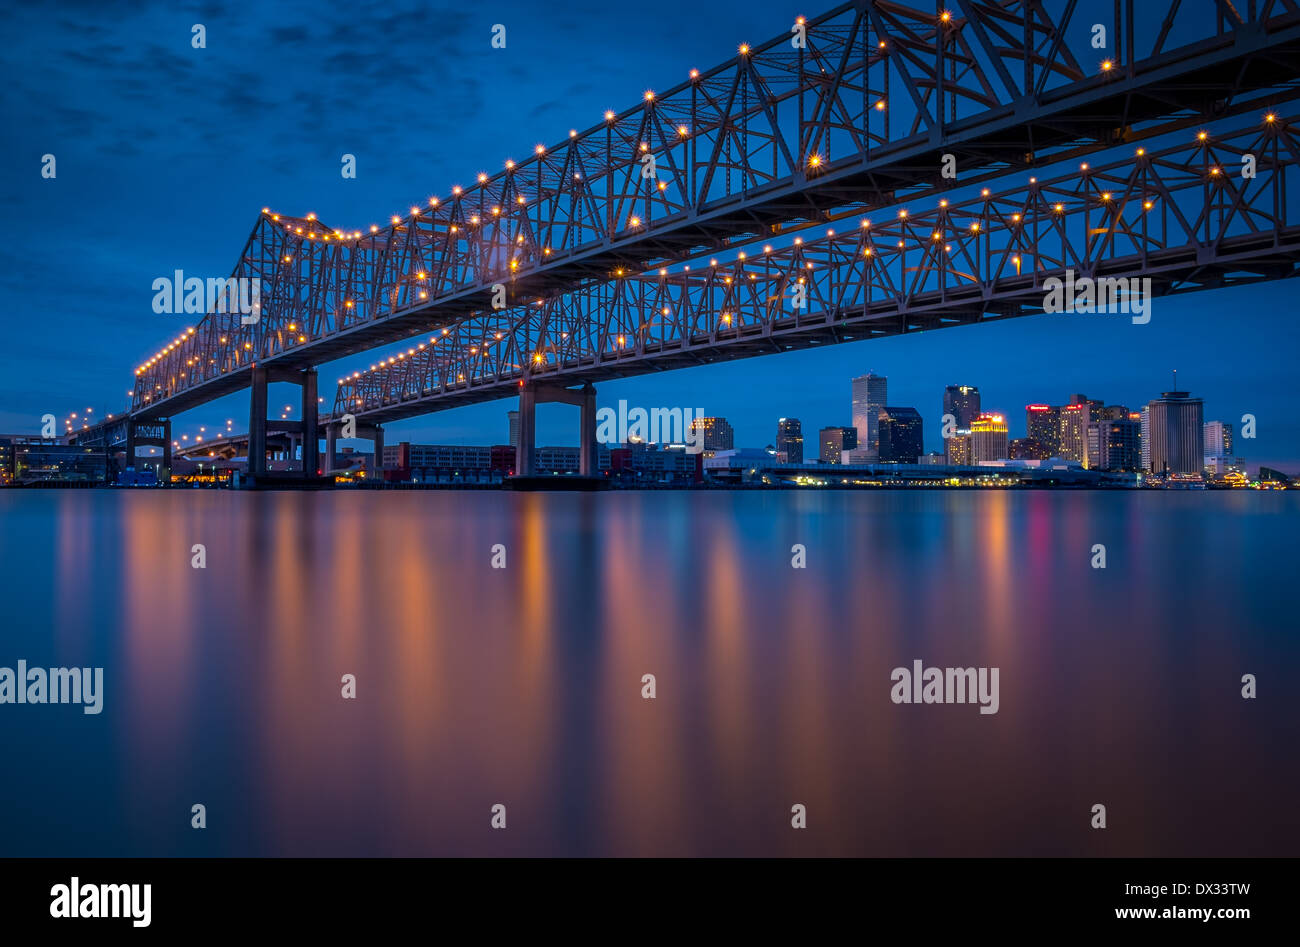 NEW ORLEANS - CIRCA FEBRUARY 2014: Night view of the Crescent City Connection over the Mississippi River and New Orleans Skyline Stock Photo